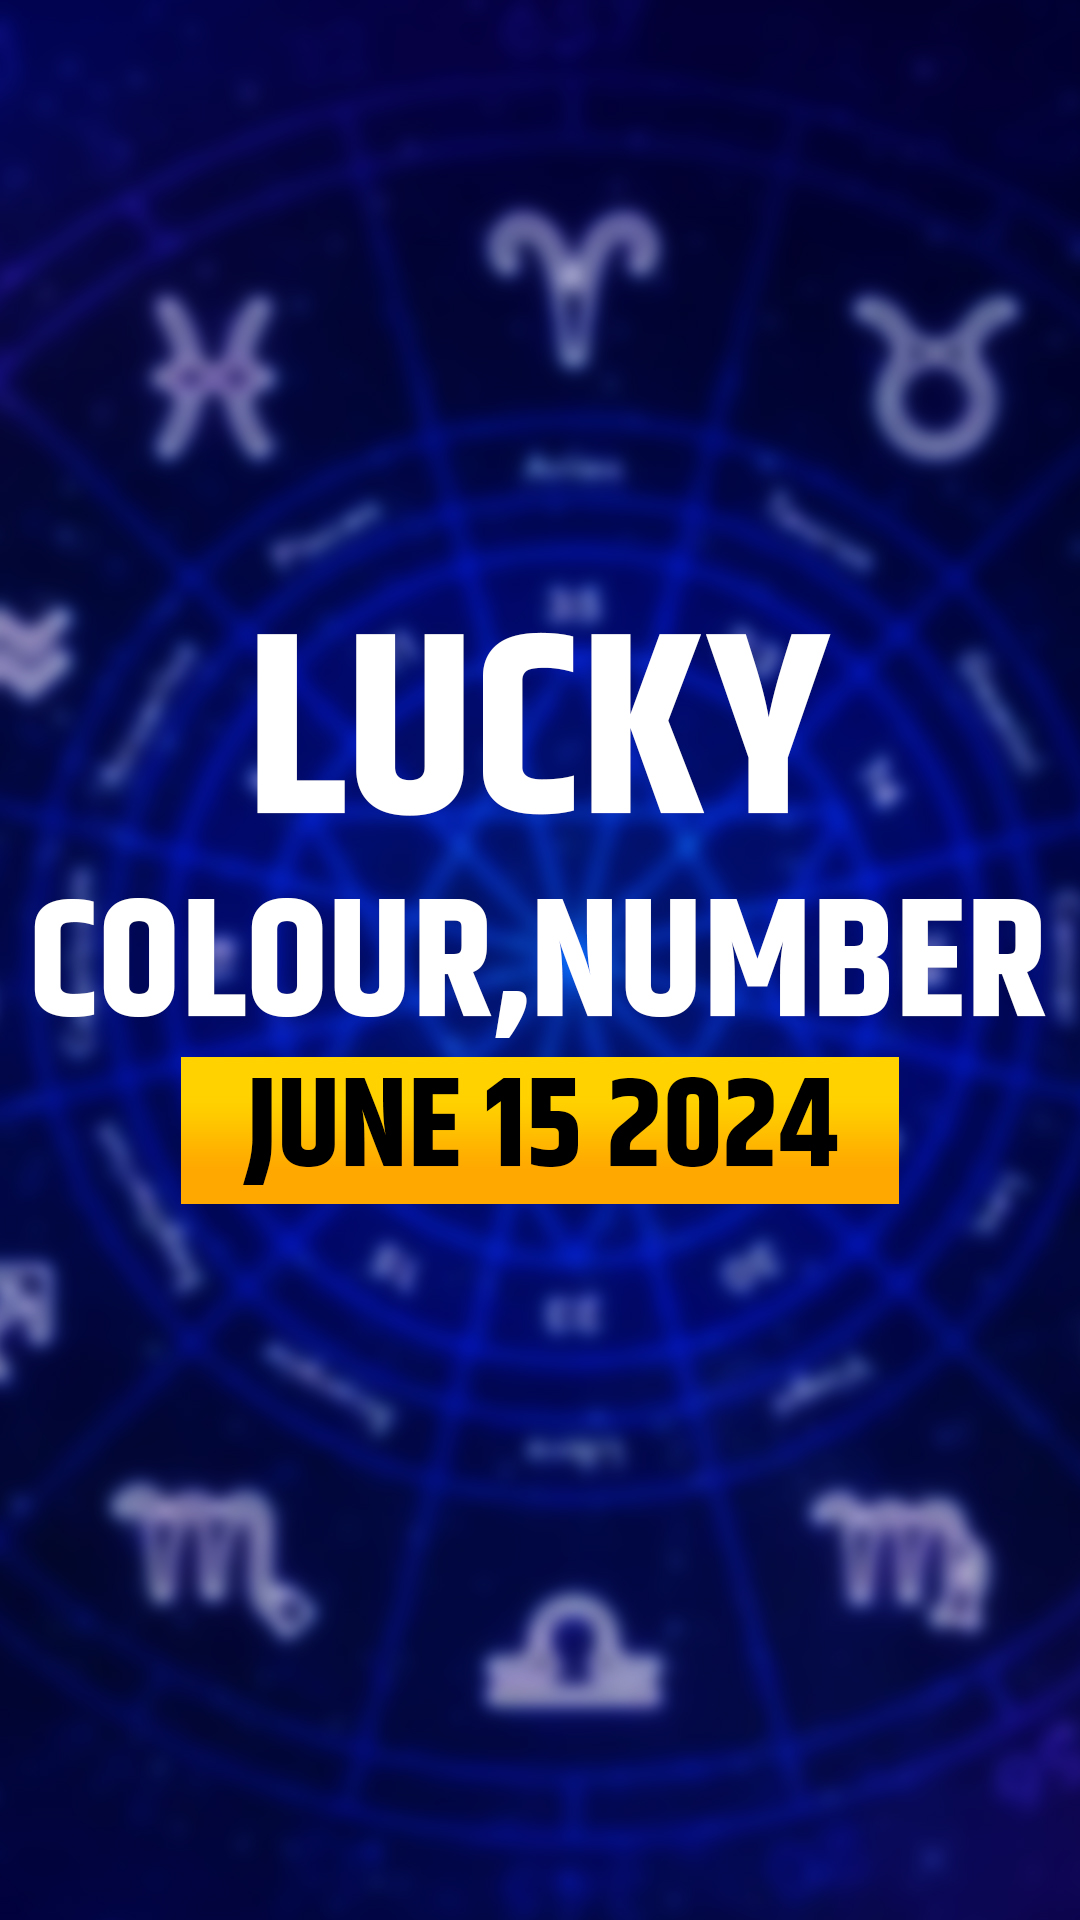 Know lucky colour, number of all zodiac signs in horoscope for June 15, 2024